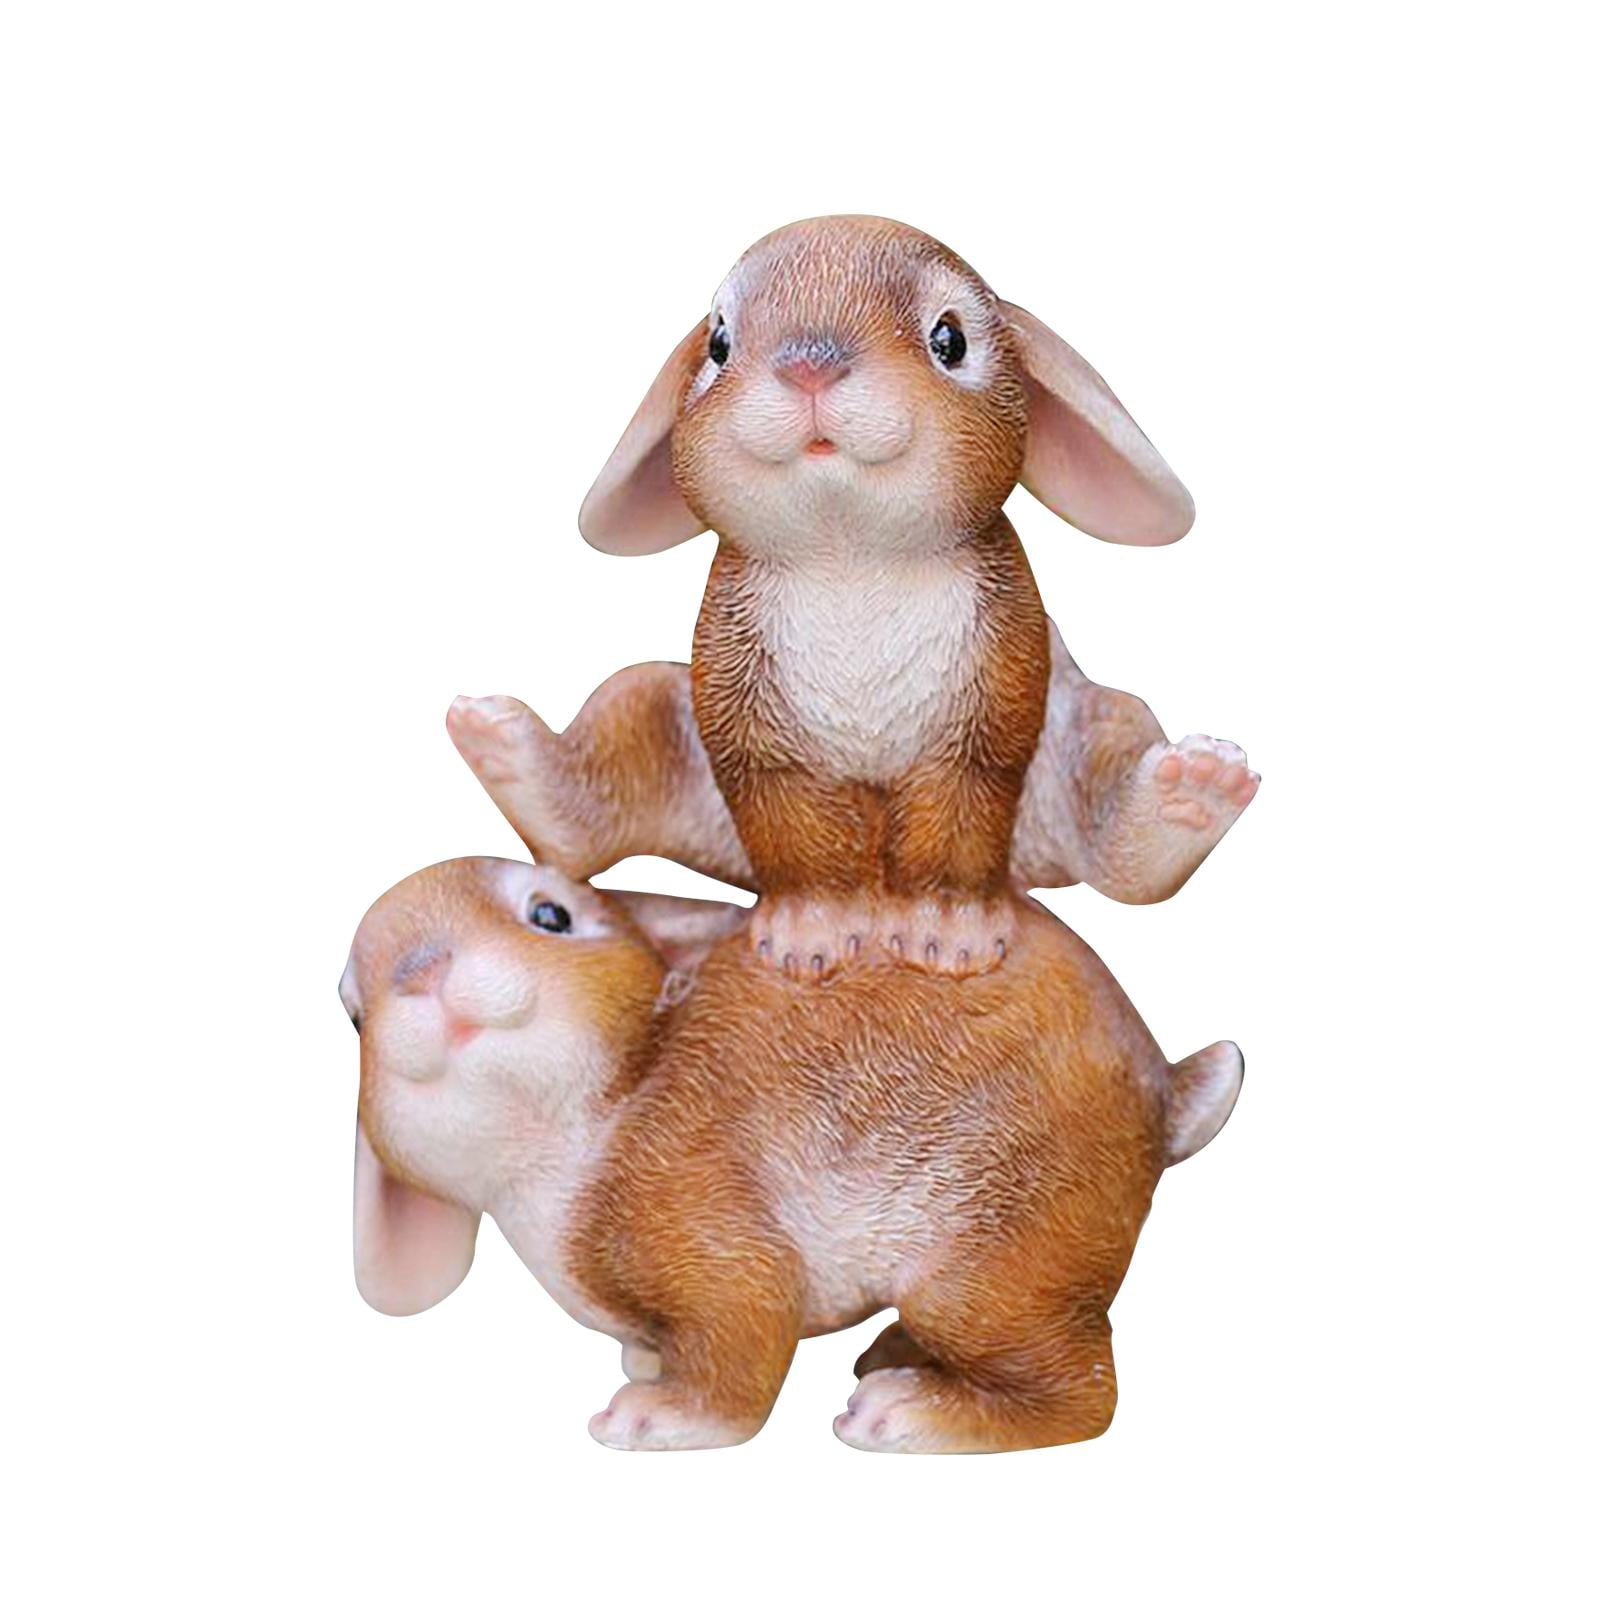  Easter Straw Bunny 35cm Decor Animal Standing with Clothes  Photo Props Rabbit Decor Bunny Figurines Easter Decoration for Desktop  Garden, Yellow : Home & Kitchen